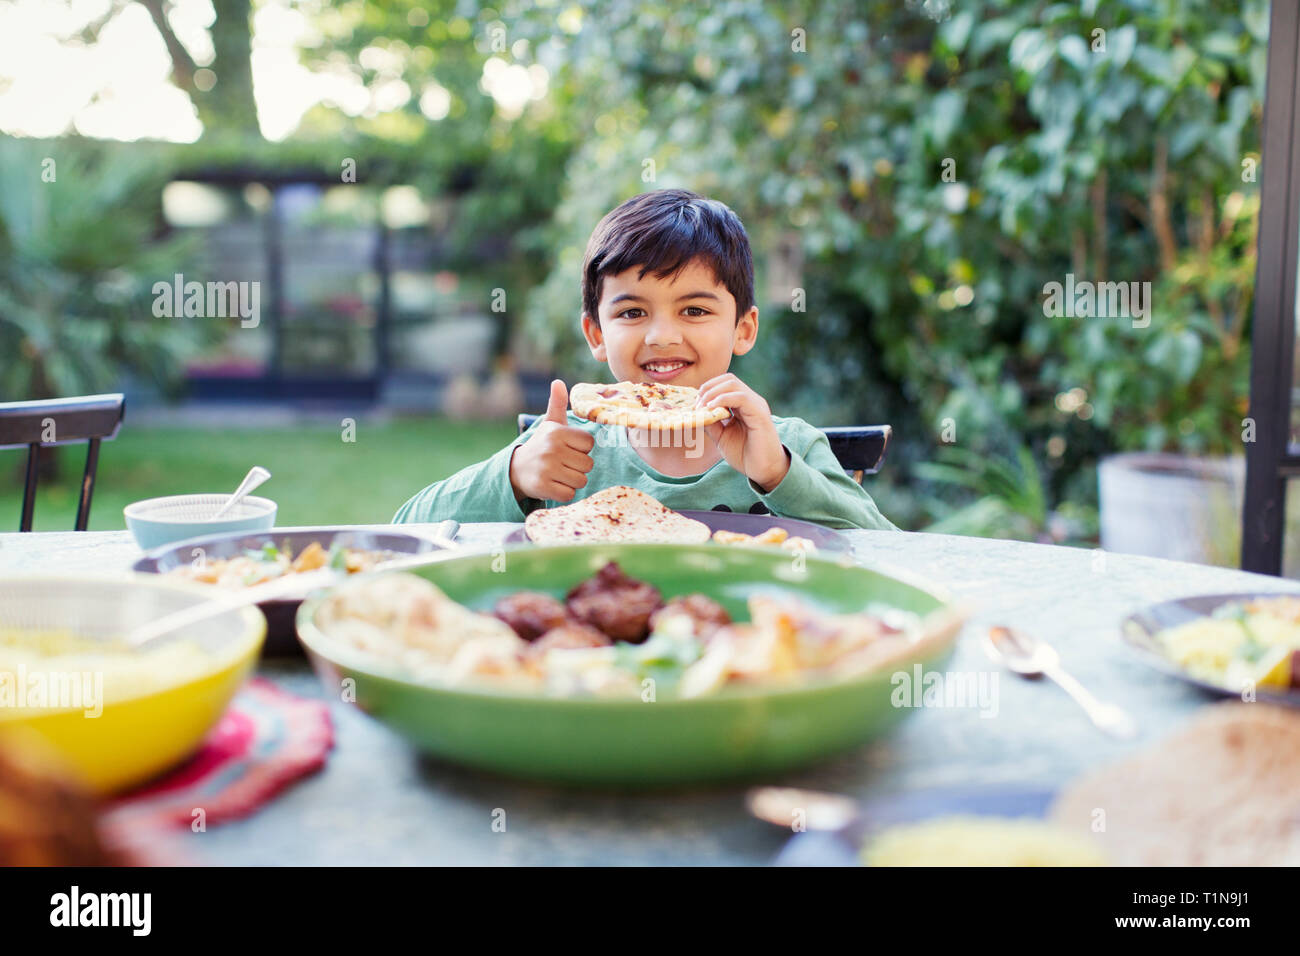 Portrait happy boy eating naan bread at patio table Stock Photo